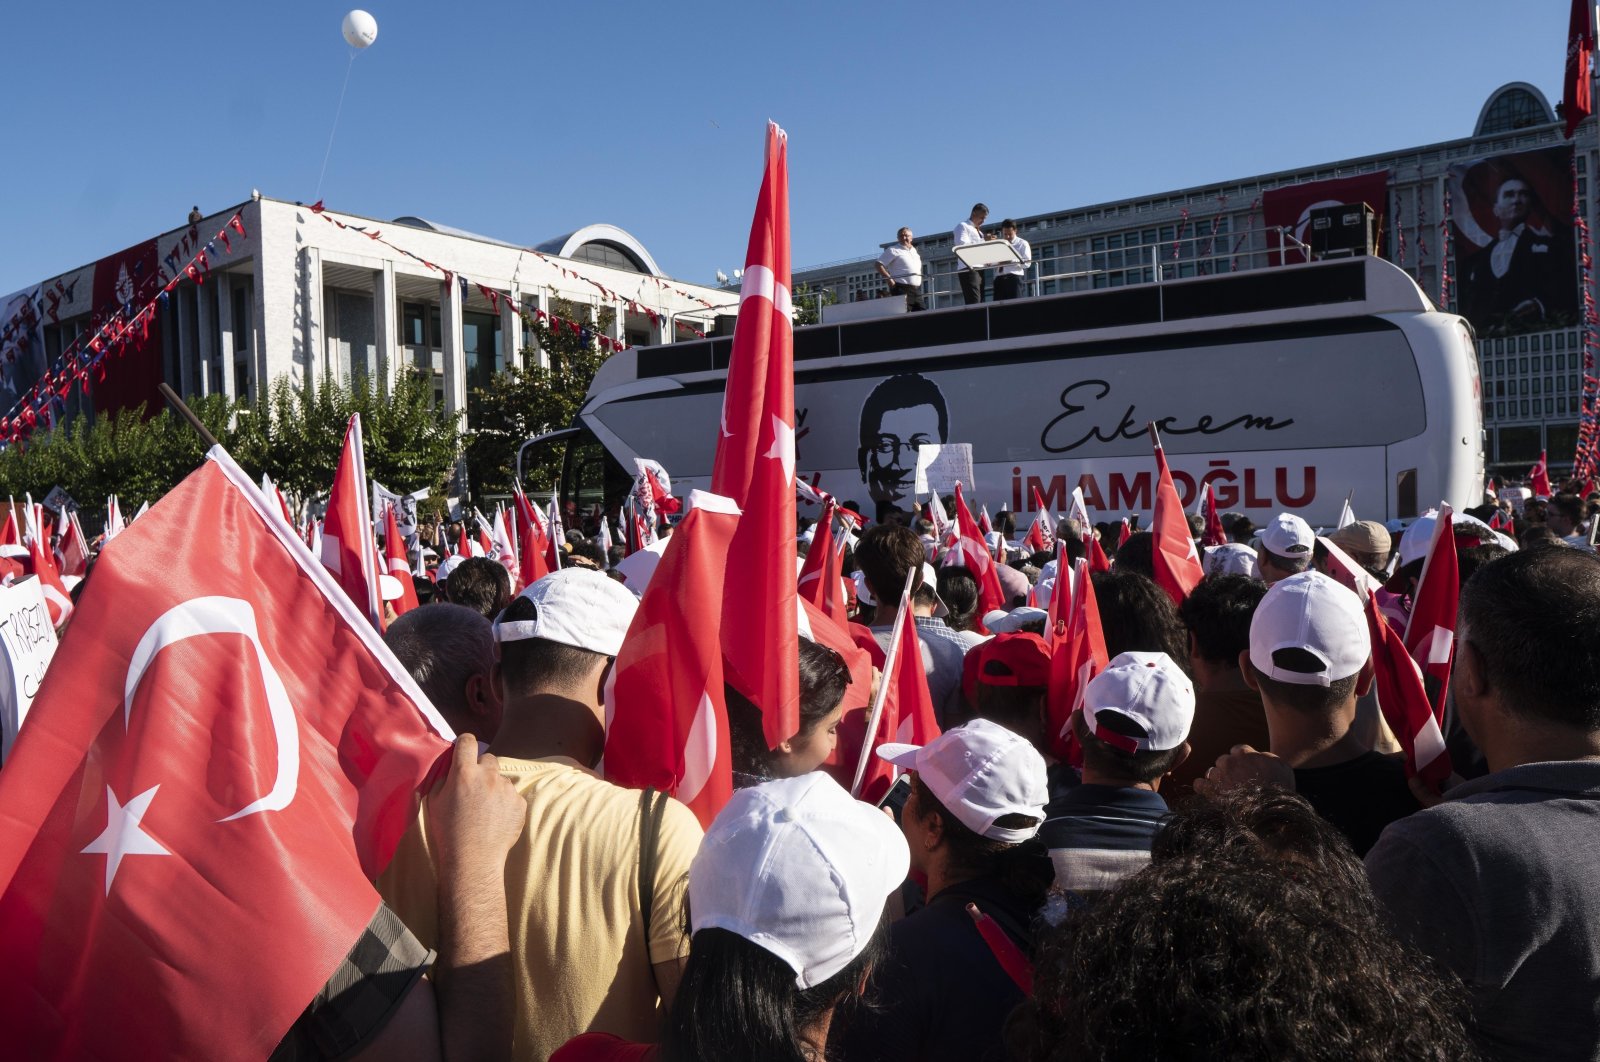 Turkish opposition leaders have described their relationship with Istanbul Mayor Ekrem Imamoglu as “father and son” and “sister and brother” to take advantage of his momentum, claim him, and control him. (Getty Images Photo)